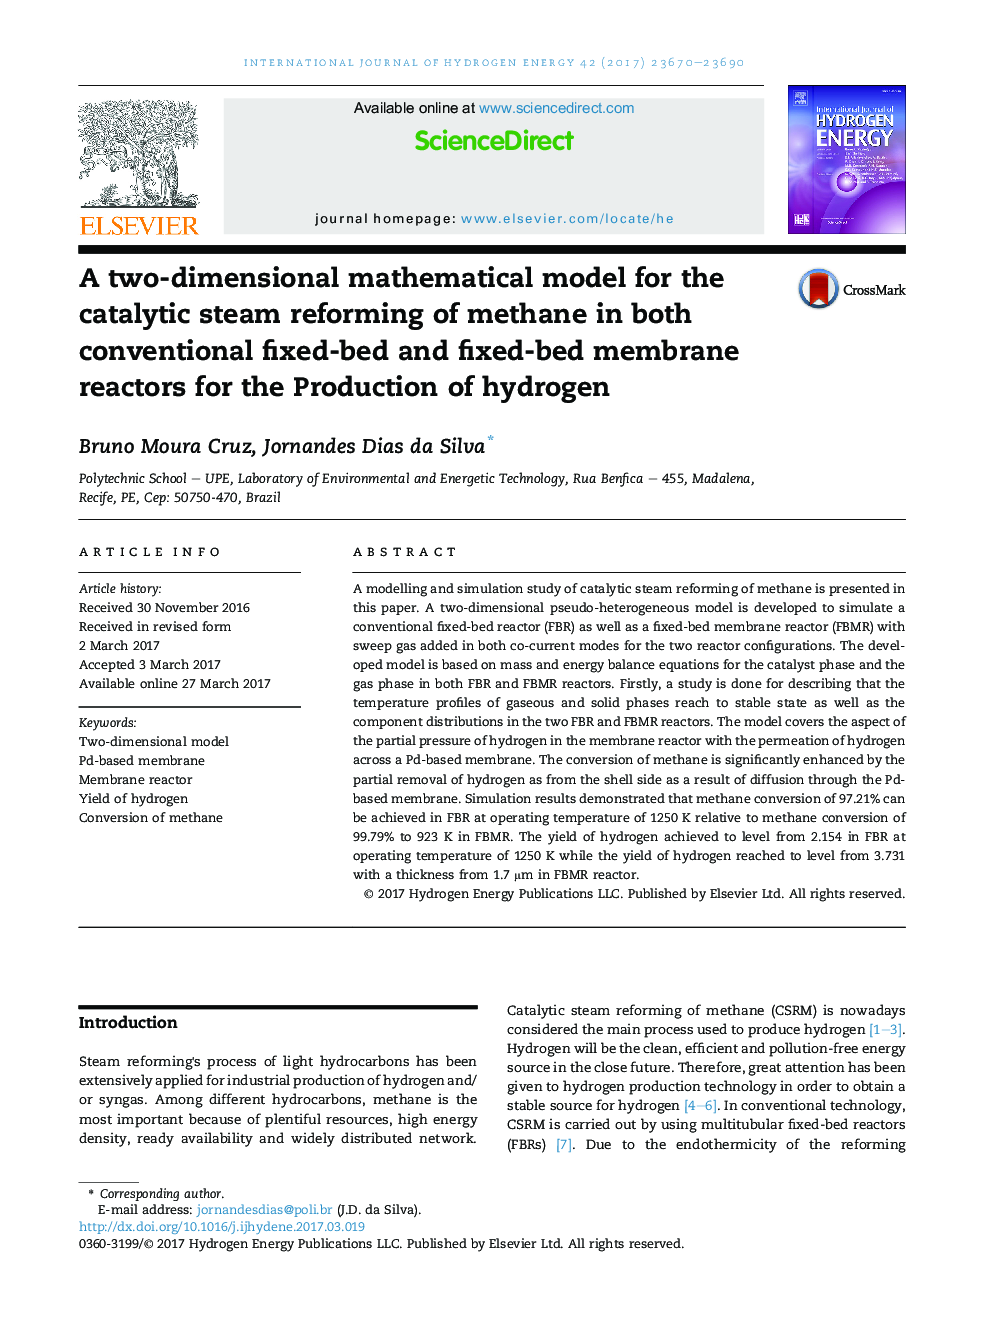 A two-dimensional mathematical model for the catalytic steam reforming of methane in both conventional fixed-bed and fixed-bed membrane reactors for the Production of hydrogen